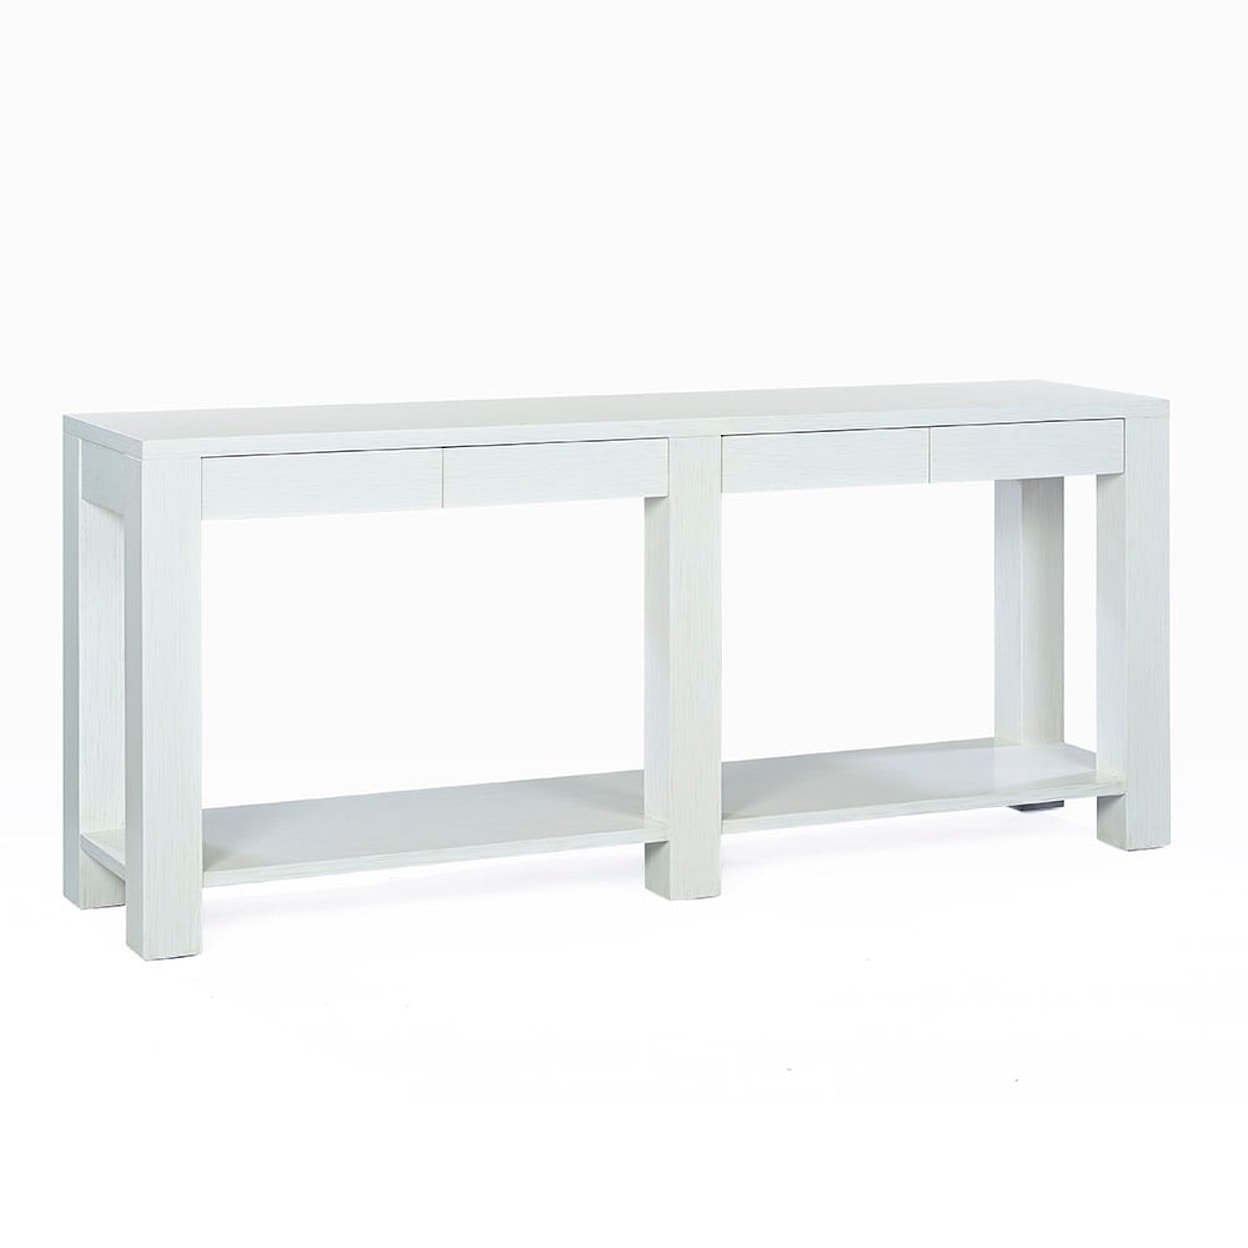 Oliver Home Furnishings Console Tables Villa Sideboard